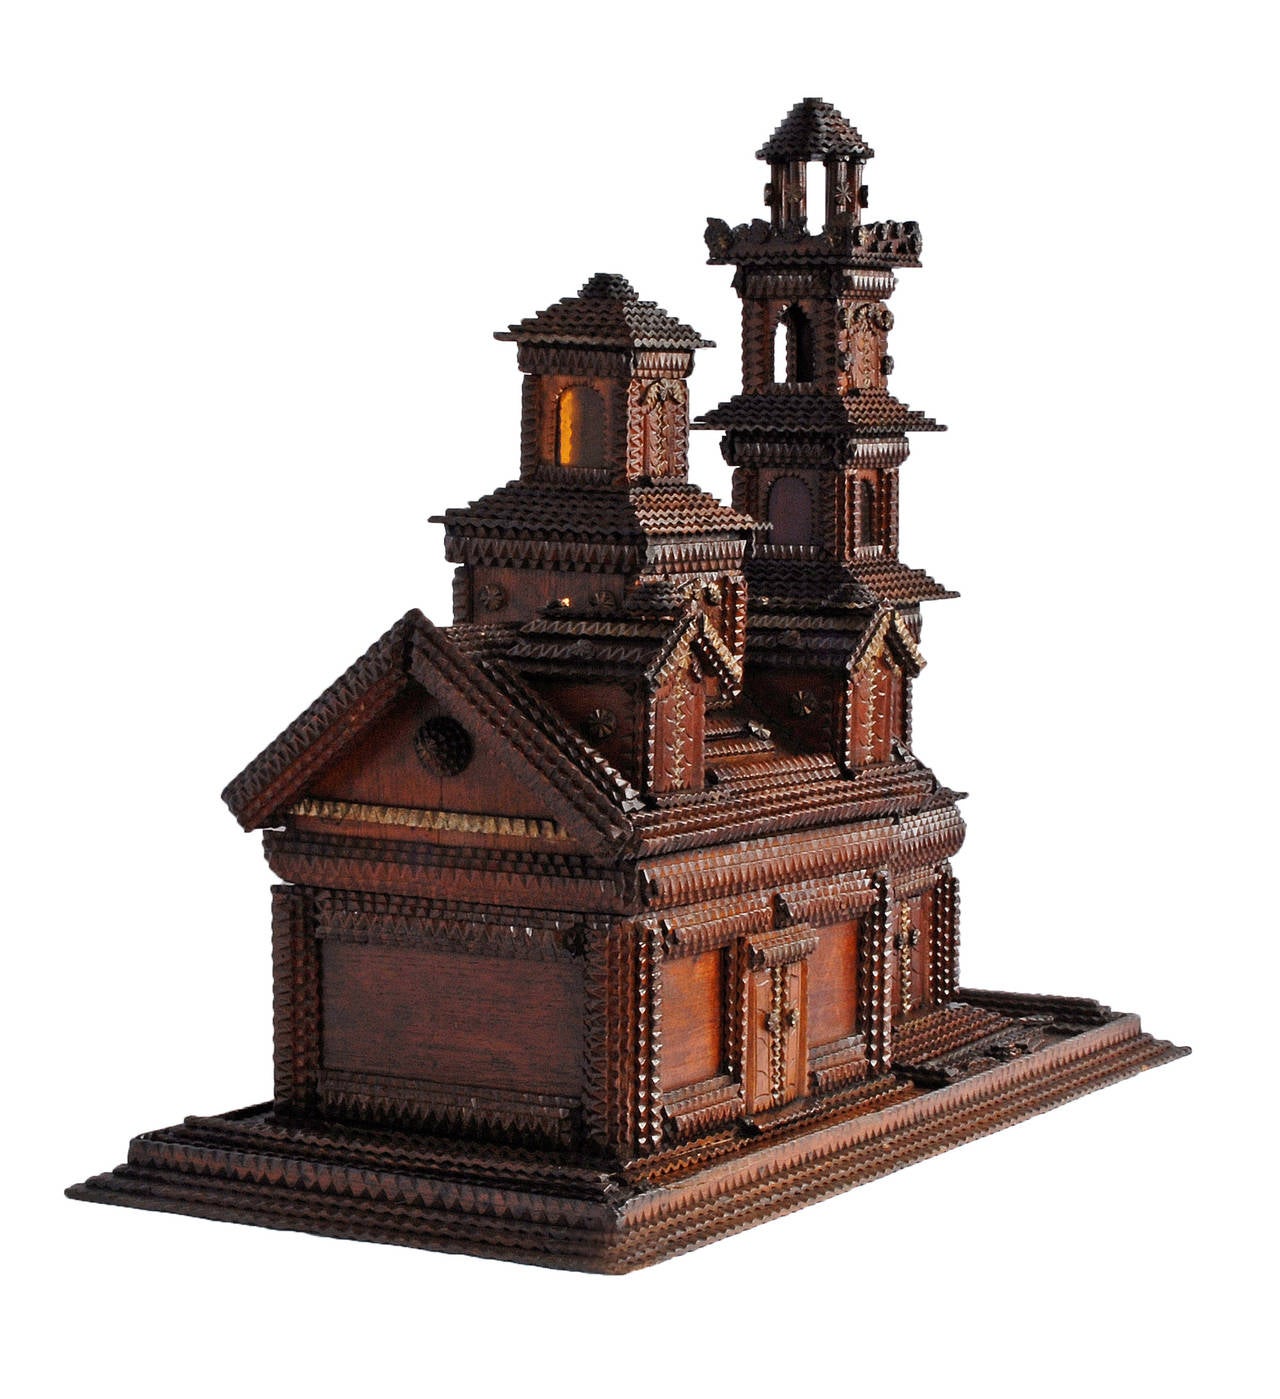 Fine Tramp Art house shaped jewelry box on a platform base with a Tramp Art tower. The house has working shutters, colored glass inserts, a door which shields a mirror, a slot for coins and has exquisitely carved details. The house lifts up to